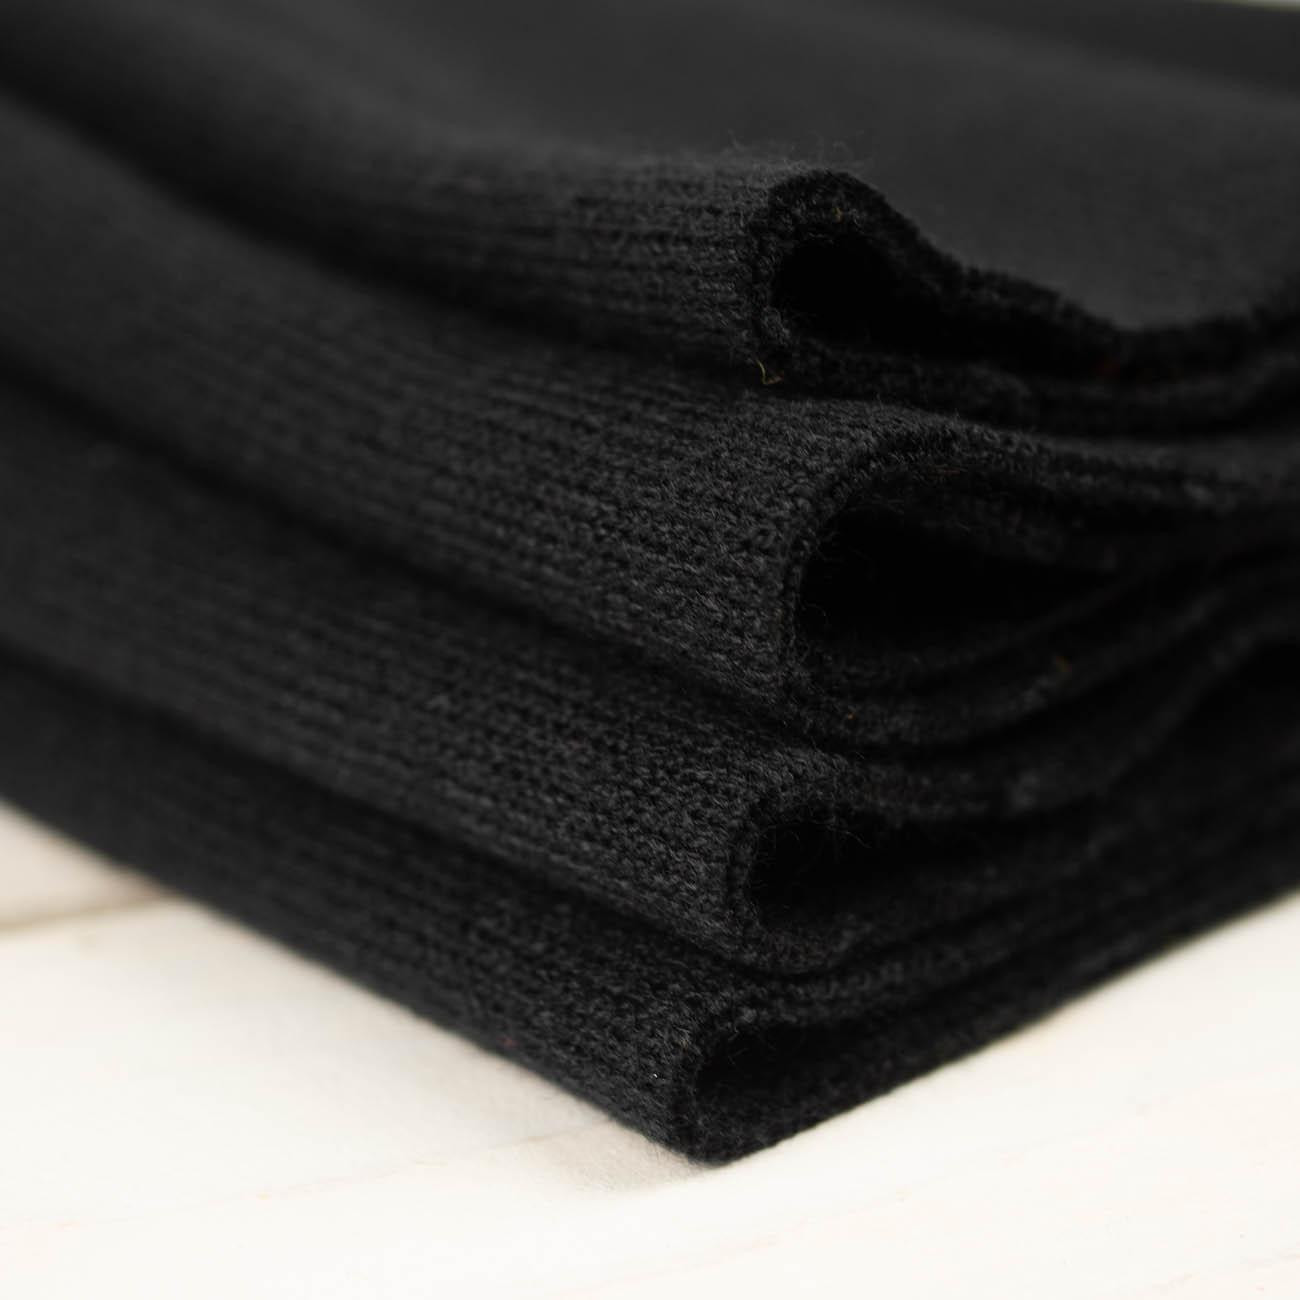 Black - solid Sweater knit fabric 345g